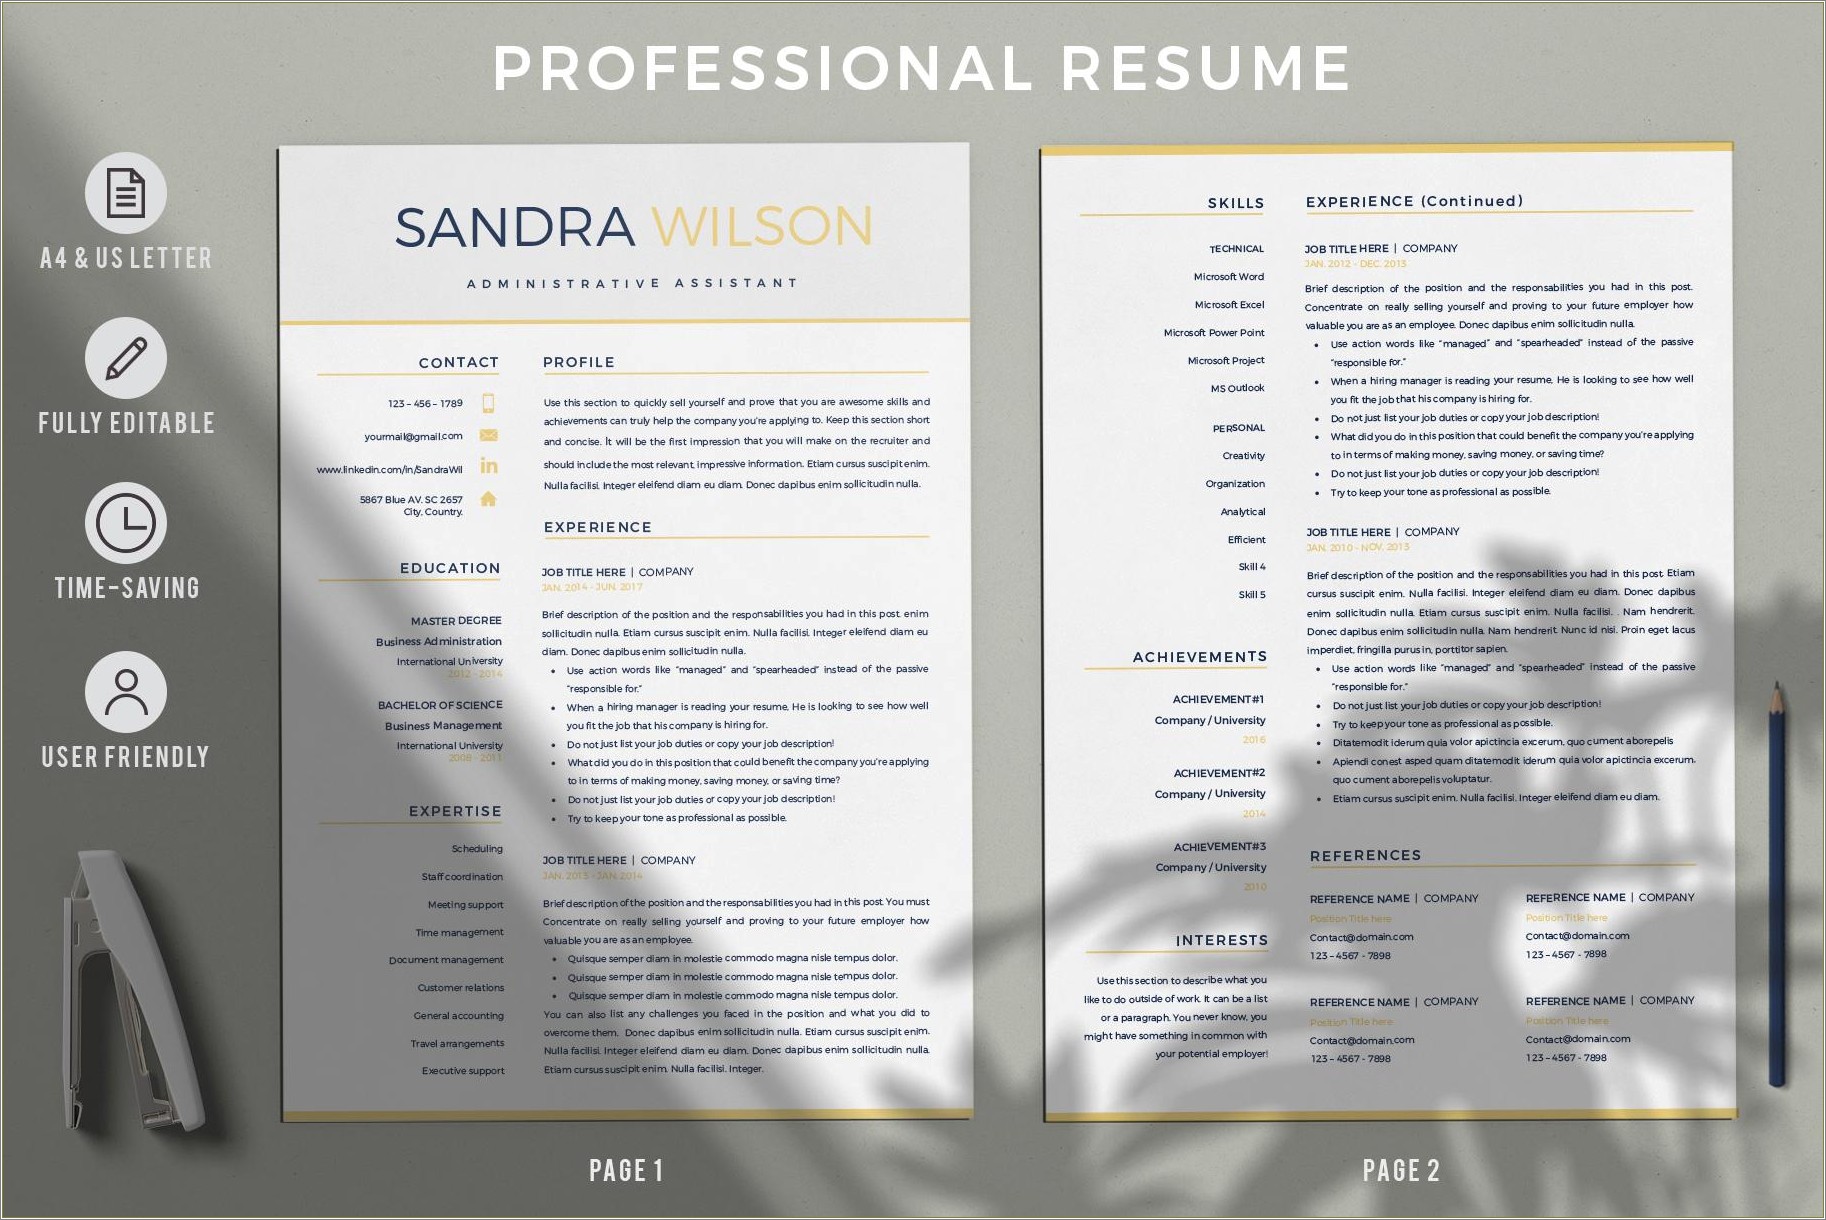 Resume Format For Job Applications To Us Companies